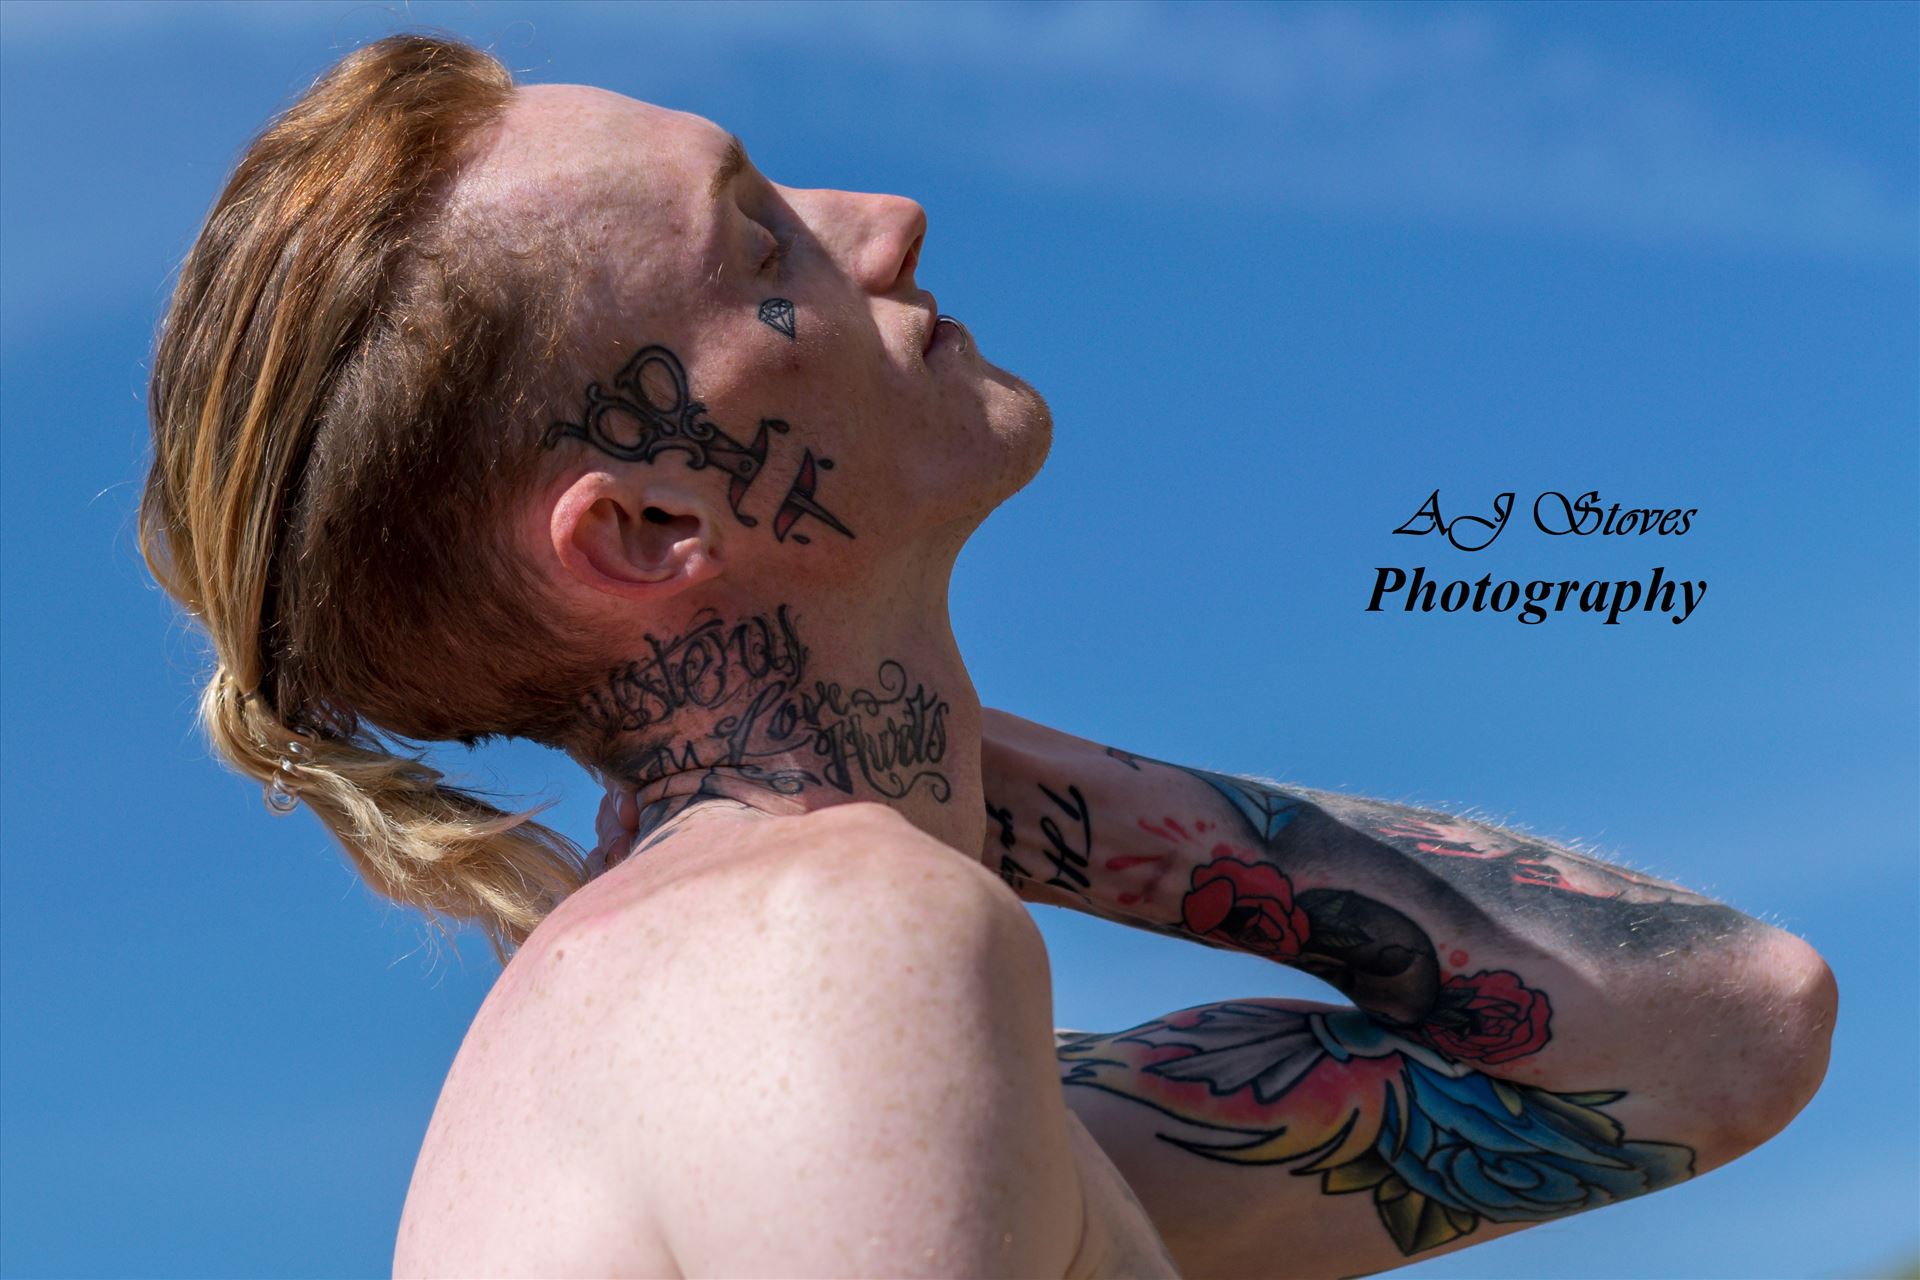 Luke Proctor 11 - Great shoot with Luke down Seaham Beach by AJ Stoves Photography